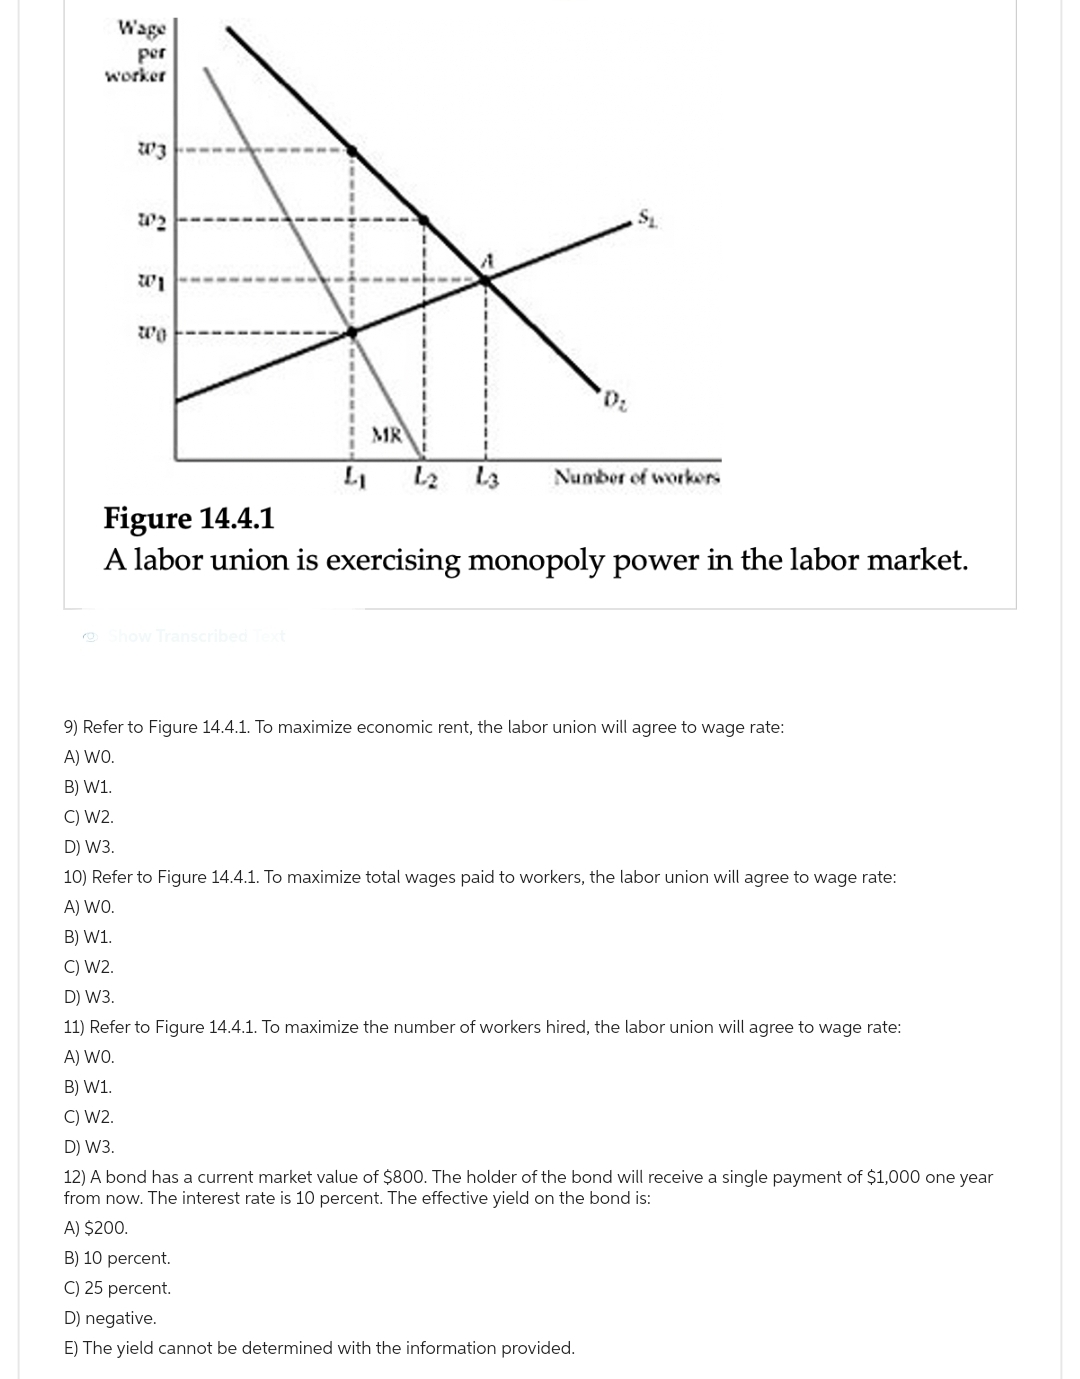 Wage
per
worker
W3
102
3
wo
4₁
Show Transcribed Text
MR
L3
0₂
Number of workers
Figure 14.4.1
A labor union is exercising monopoly power in the labor market.
9) Refer to Figure 14.4.1. To maximize economic rent, the labor union will agree to wage rate:
A) WO.
B) W1.
C) W2.
D) W3.
10) Refer to Figure 14.4.1. To maximize total wages paid to workers, the labor union will agree to wage rate:
A) WO.
B) W1.
C) W2.
D) W3.
11) Refer to Figure 14.4.1. To maximize the number of workers hired, the labor union will agree to wage rate:
A) WO.
B) W1.
C) W2.
D) W3.
12) A bond has a current market value of $800. The holder of the bond will receive a single payment of $1,000 one year
from now. The interest rate is 10 percent. The effective yield on the bond is:
A) $200.
B) 10 percent.
C) 25 percent.
D) negative.
E) The yield cannot be determined with the information provided.